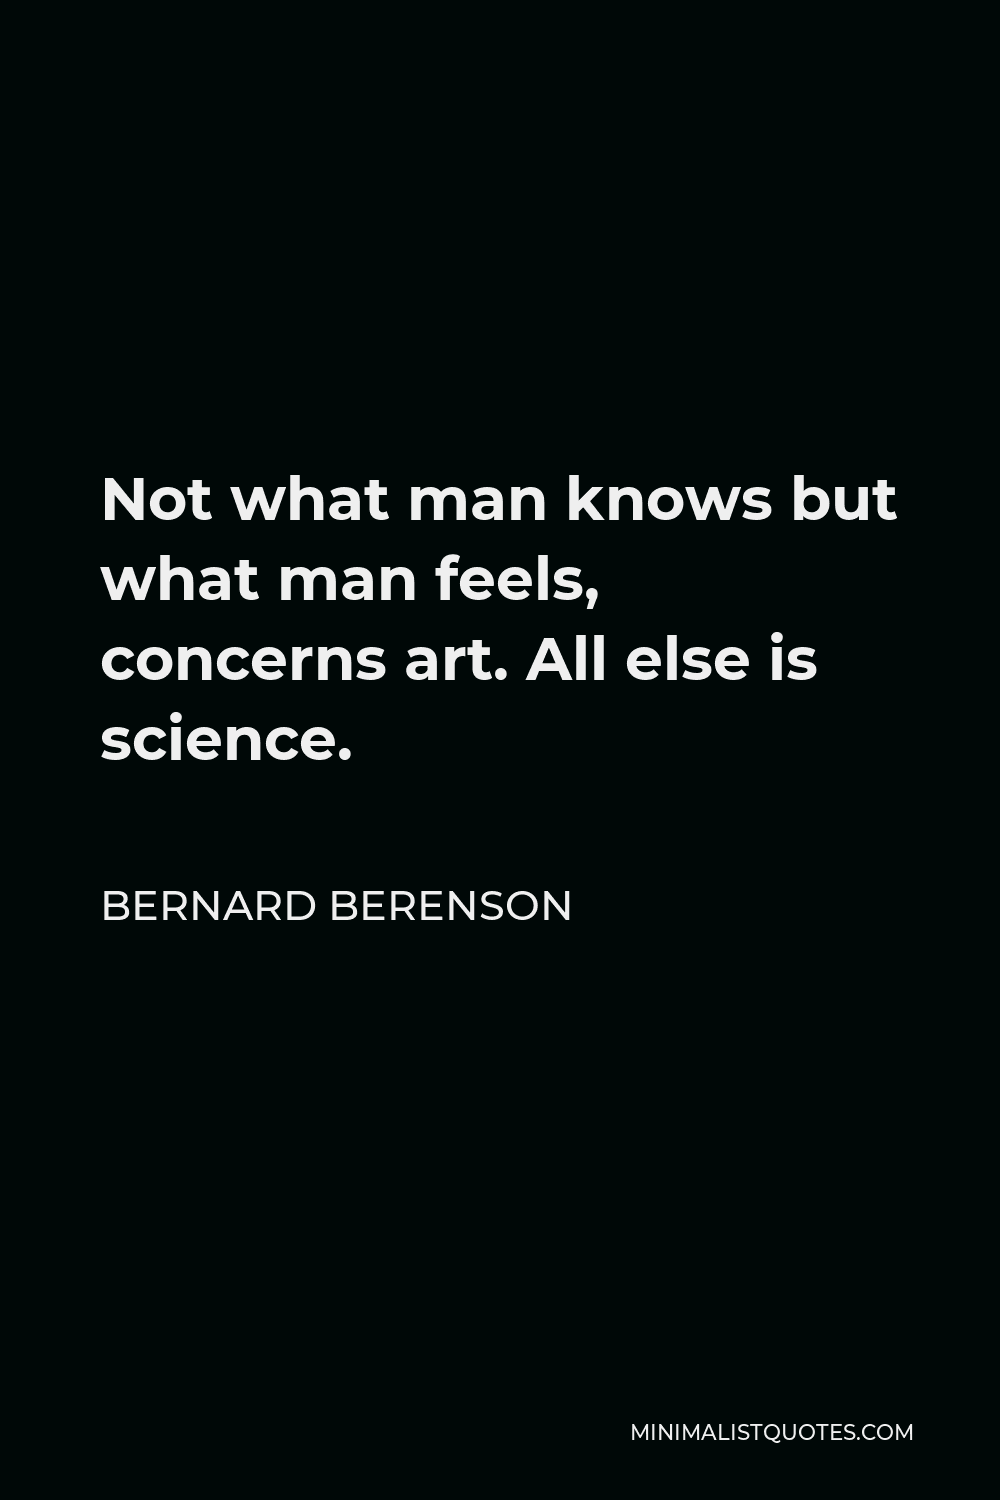 Bernard Berenson Quote - Not what man knows but what man feels, concerns art. All else is science.